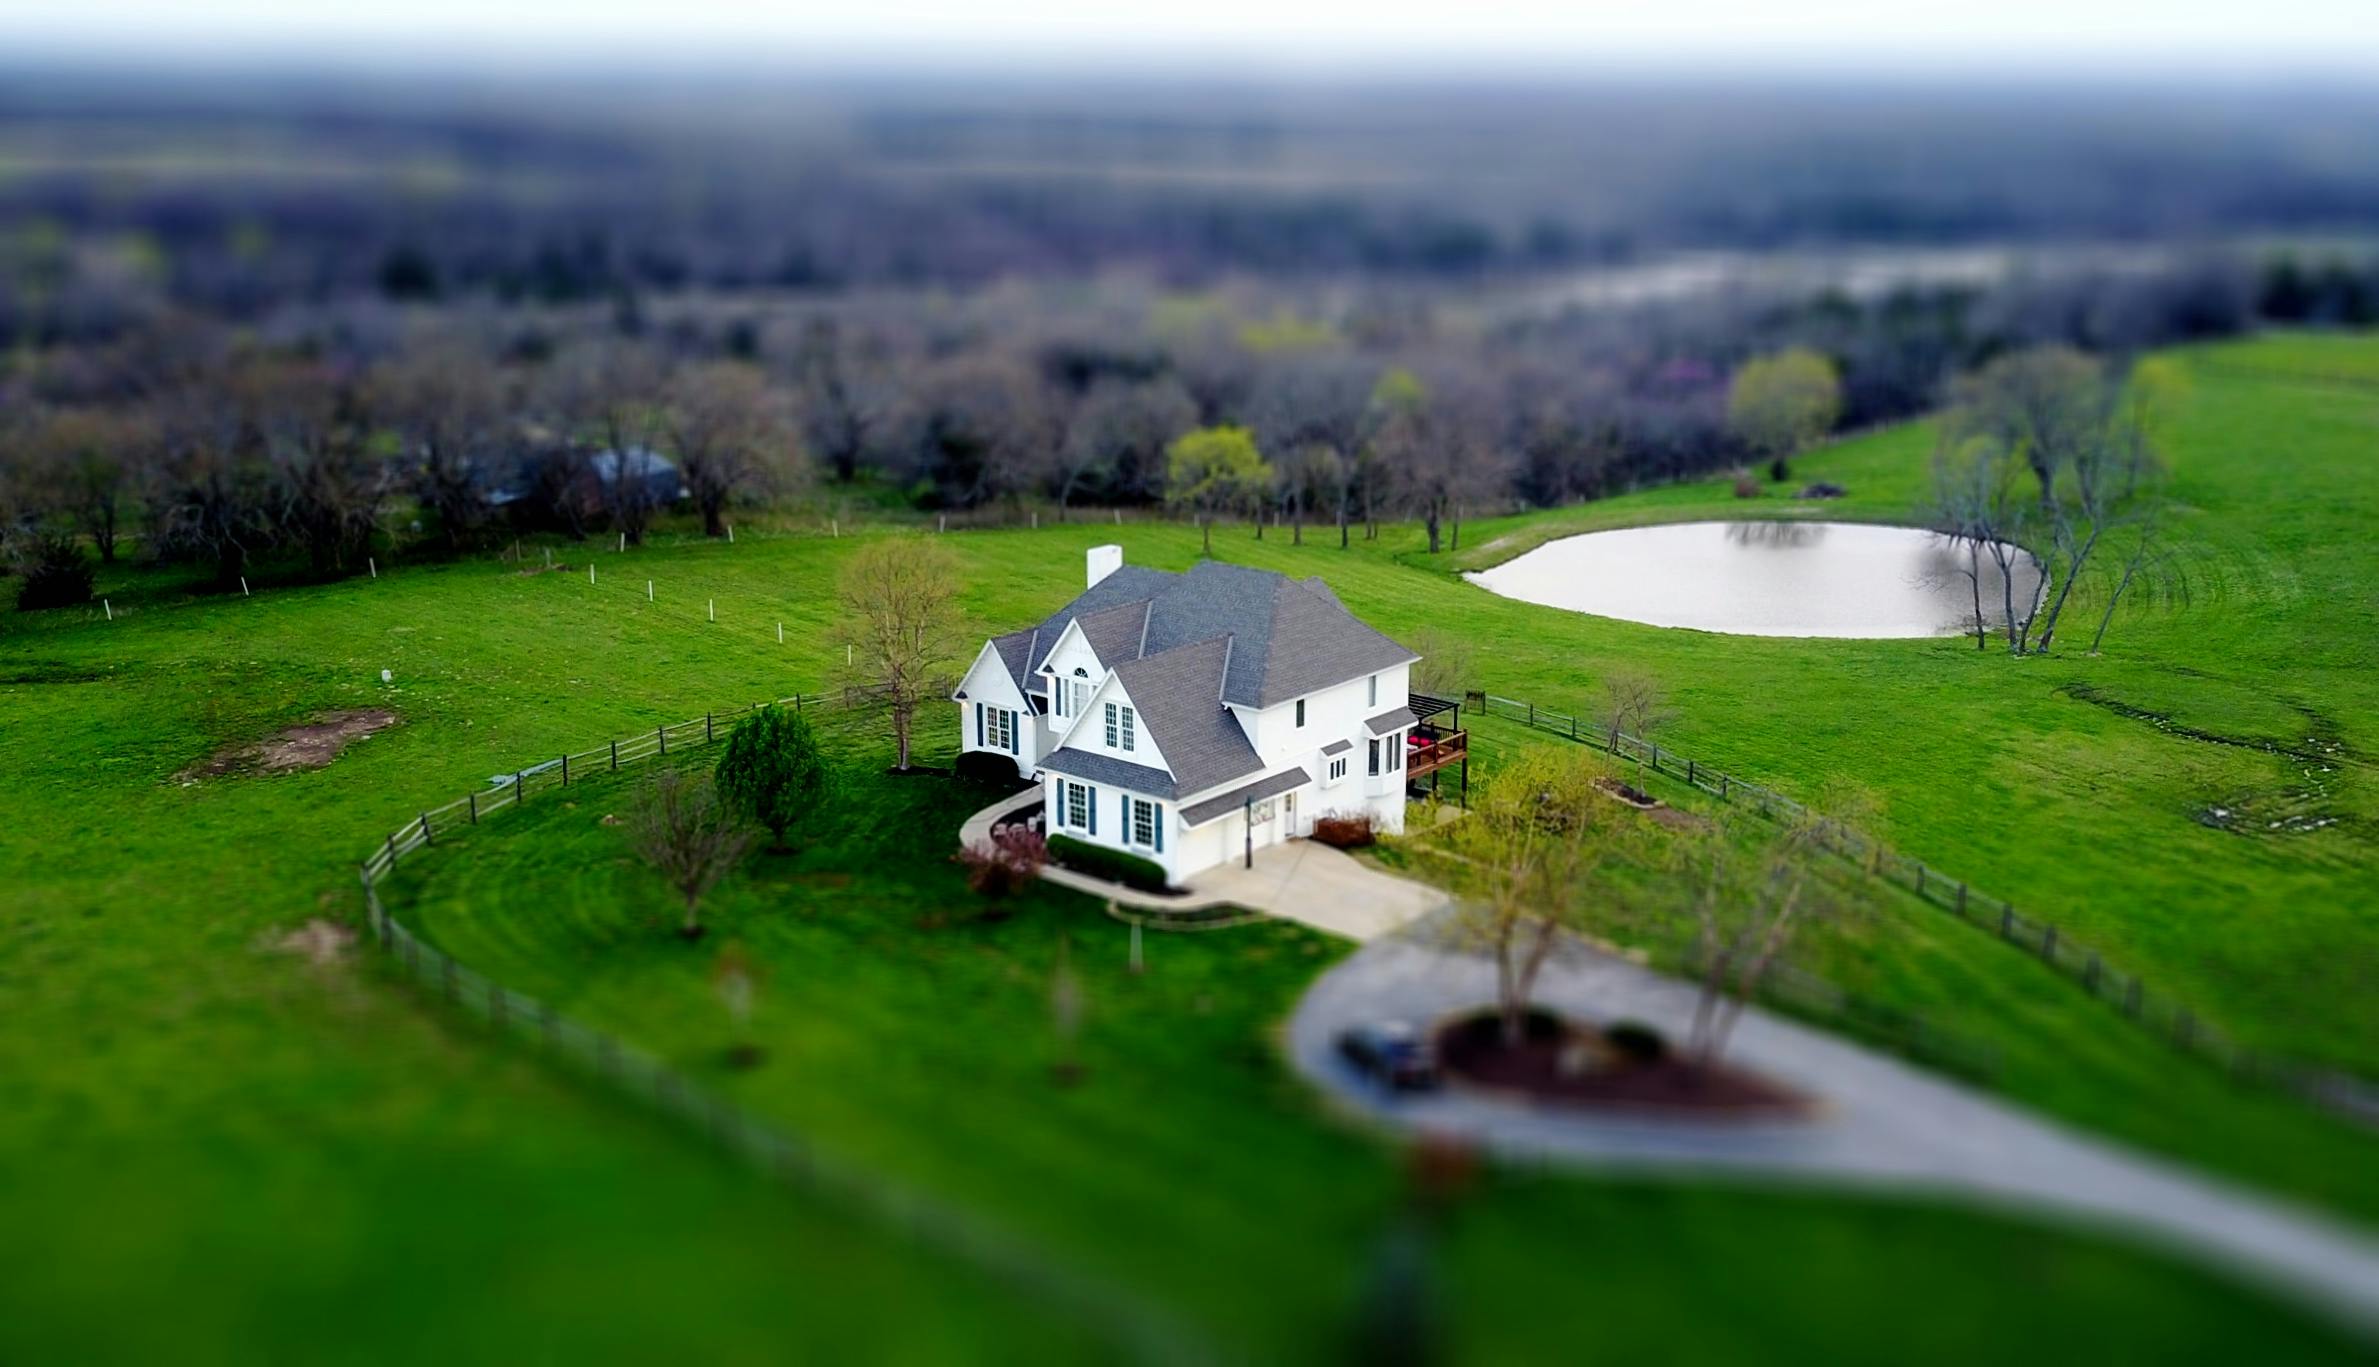 a large white house sitting on top of a lush green field, a tilt shift photo, pexels contest winner, photorealism, lake house, midwest town, drone photograpghy, model miniature